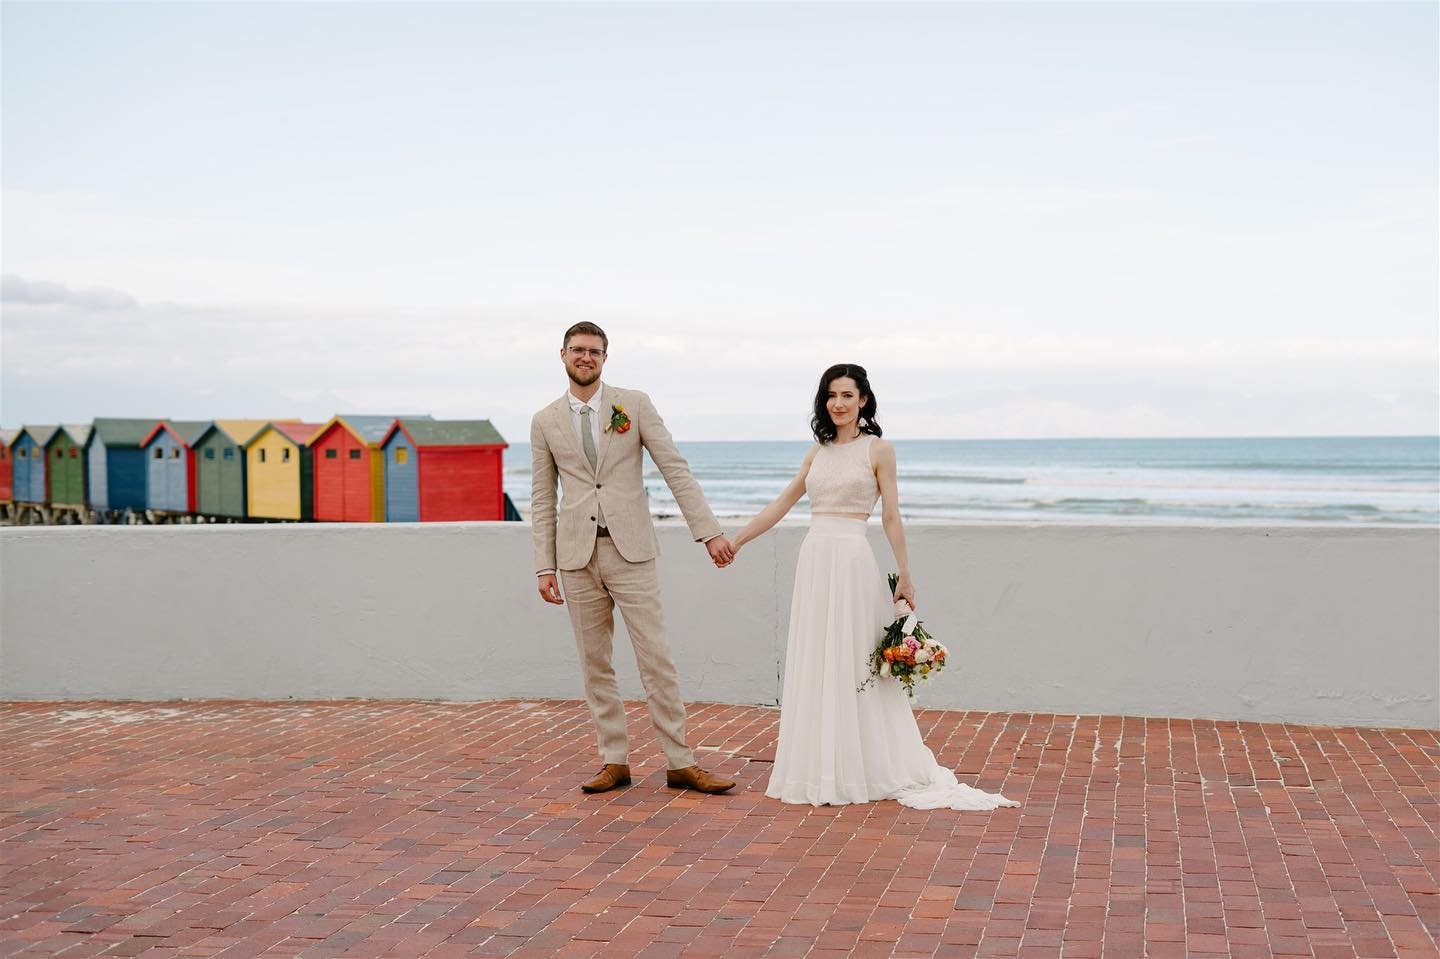 If you get married in Muizenberg you have to have the beach huts in at least one of your photos 😜 I can&rsquo;t believe it&rsquo;s been over a year since this special day! 

Venue: @casalabiabyideascartel 
Decor: @baie_goeters @allthingsweddings
DJ: